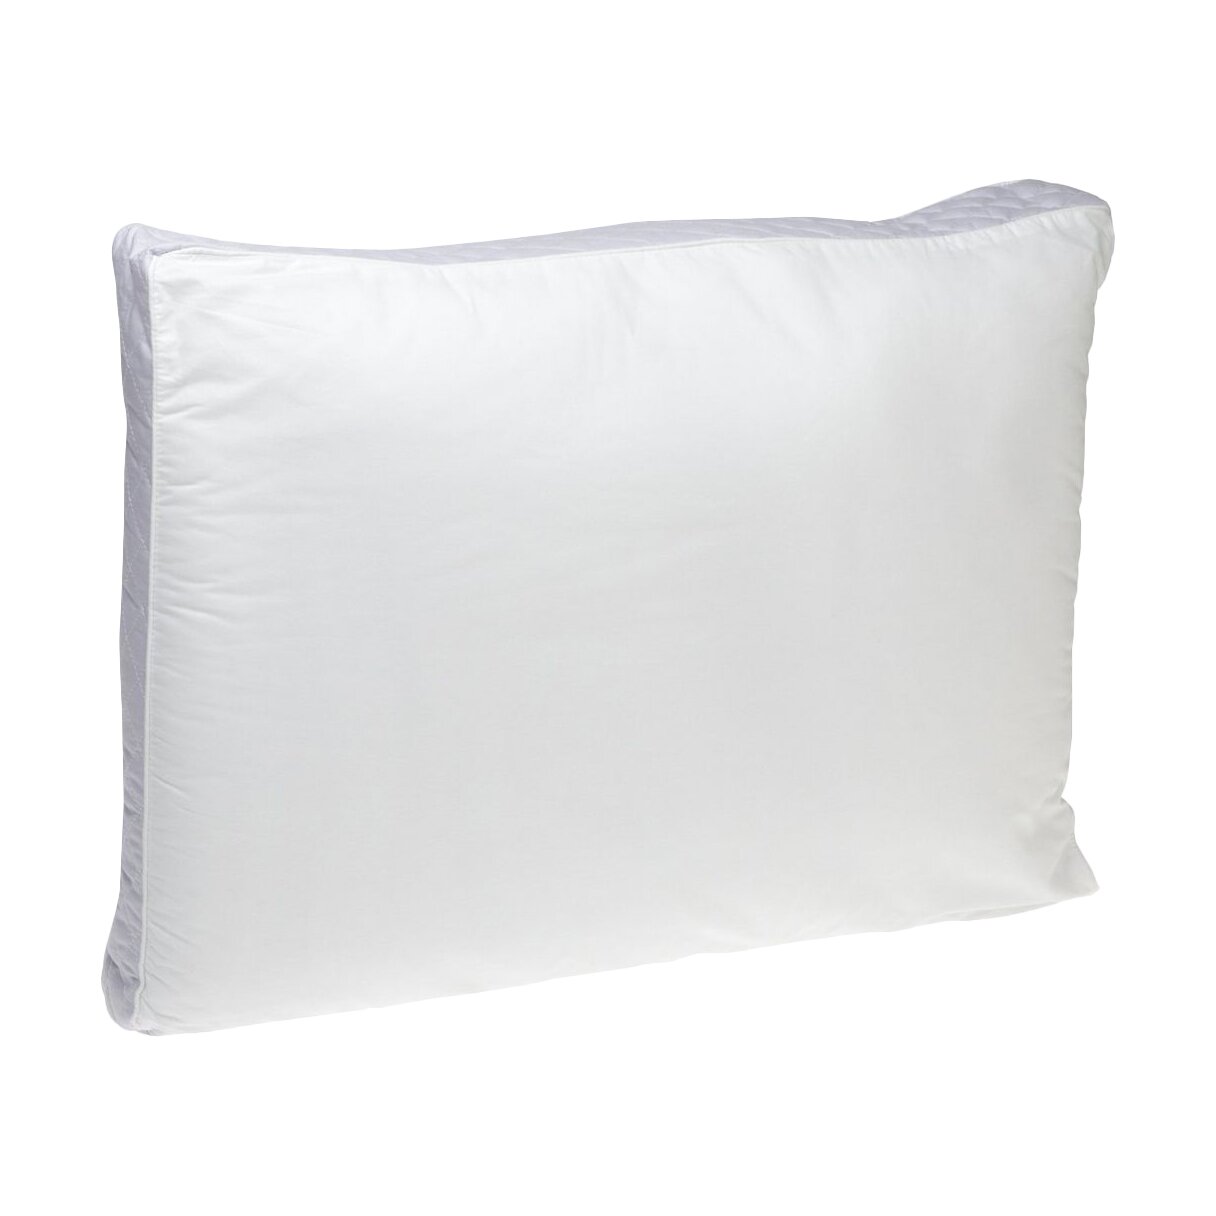 Extra%2BFirm%2BDensity%2B233%2BThread Count%2BQuilted%2BSidewall%2BPillow%2B%2528Set%2Bof%2B2%2529 